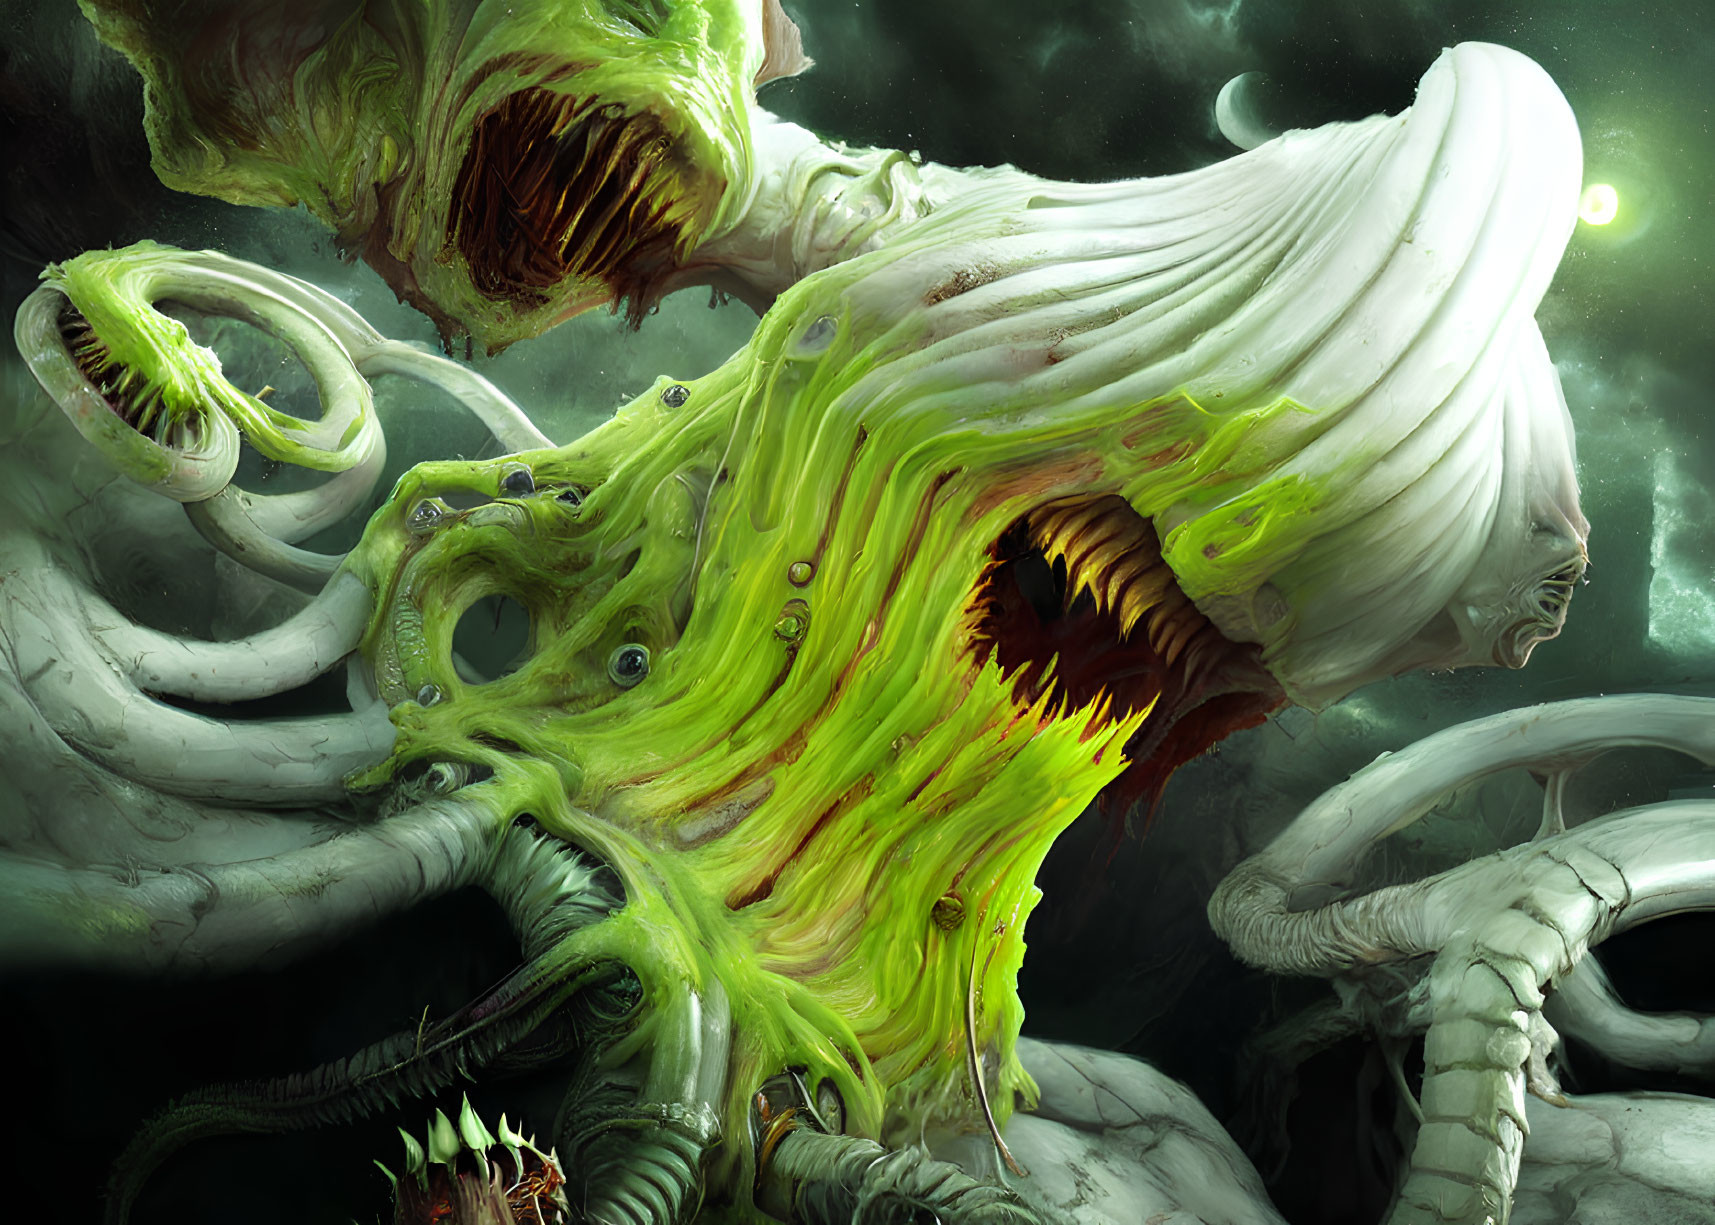 Eerie green luminescent creature with gaping maw in cosmic setting